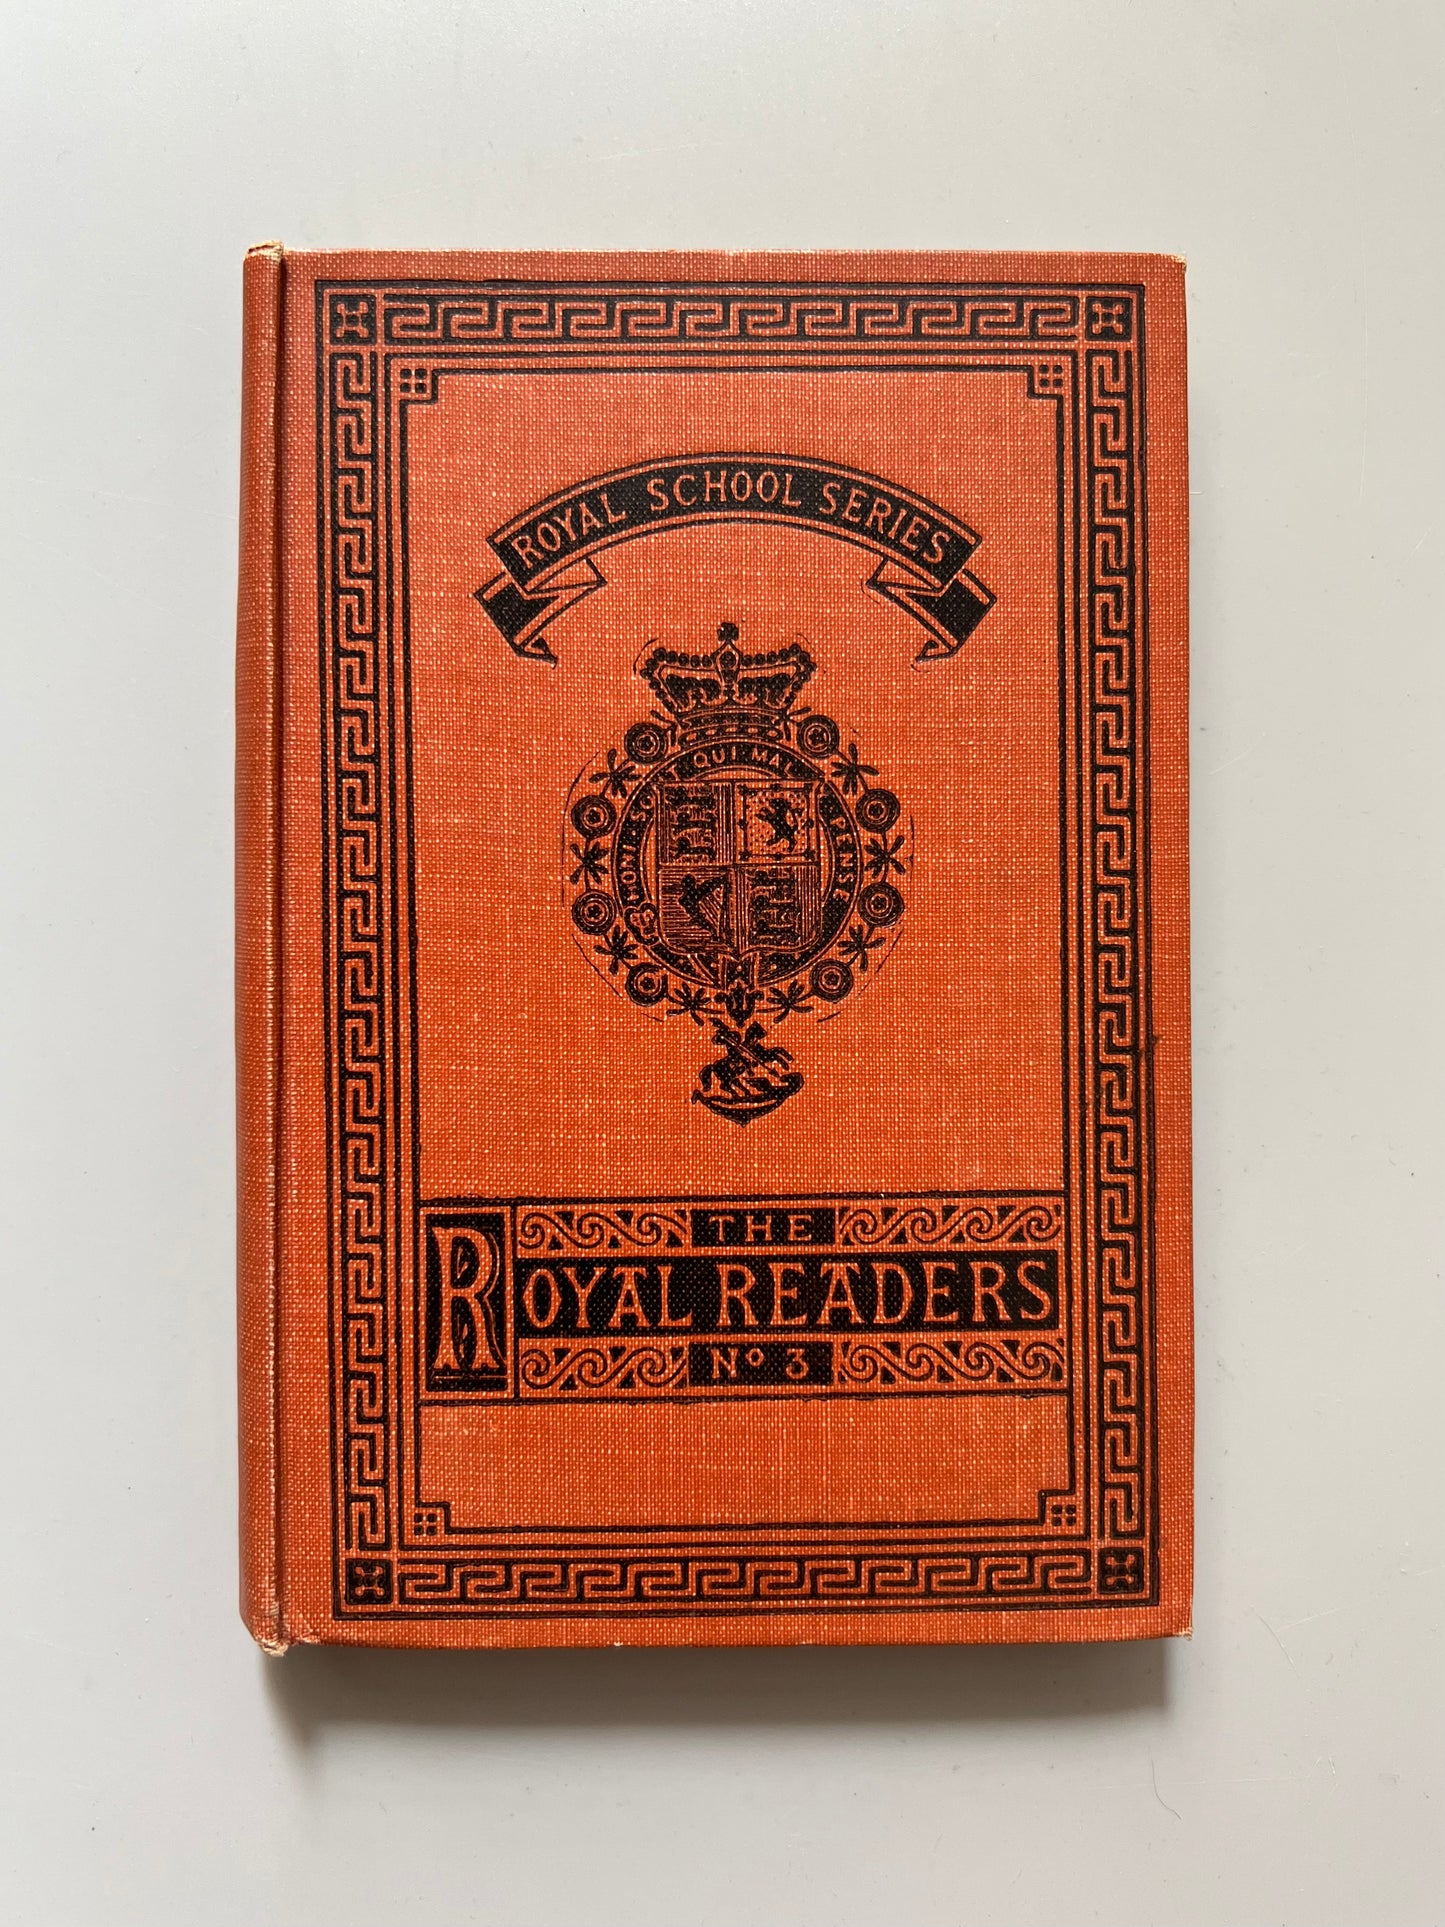 The Royal Readers nº3. Royal School Series - Thomas Nelson and Sons, 1940